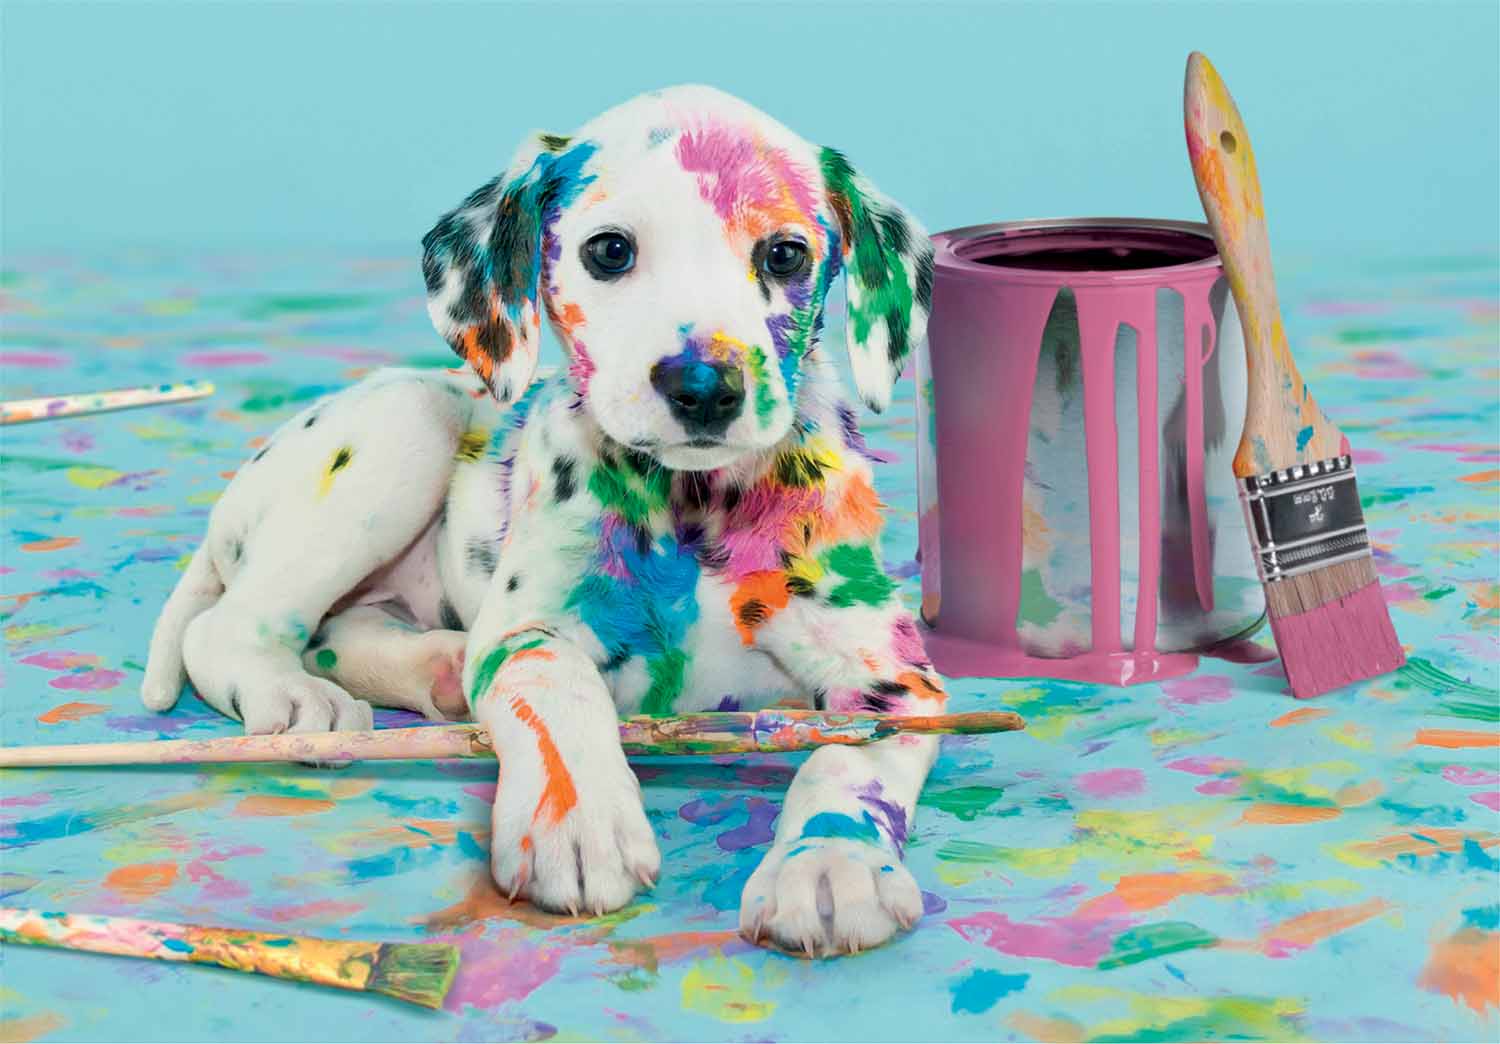 The Funny Dalmatian Dogs Jigsaw Puzzle